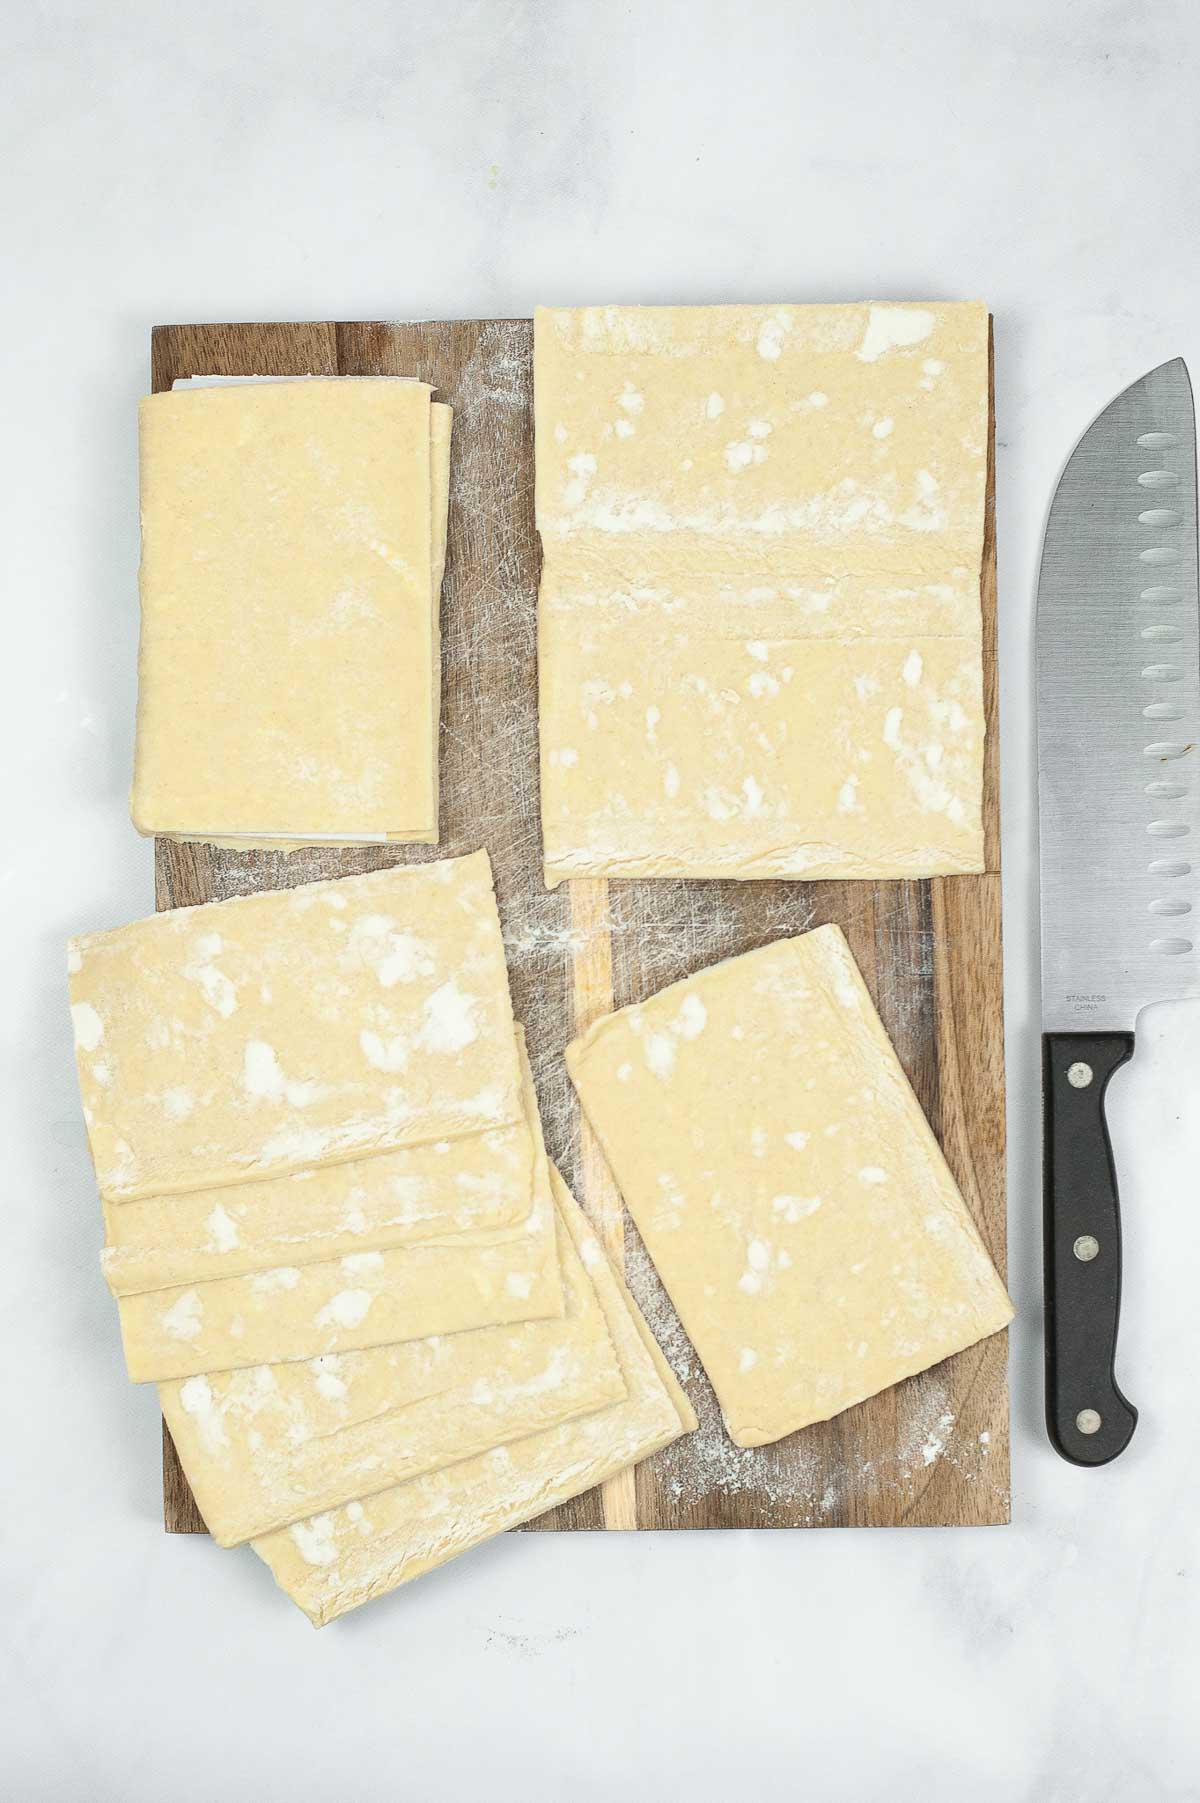 Puff pastry cut into rectangles